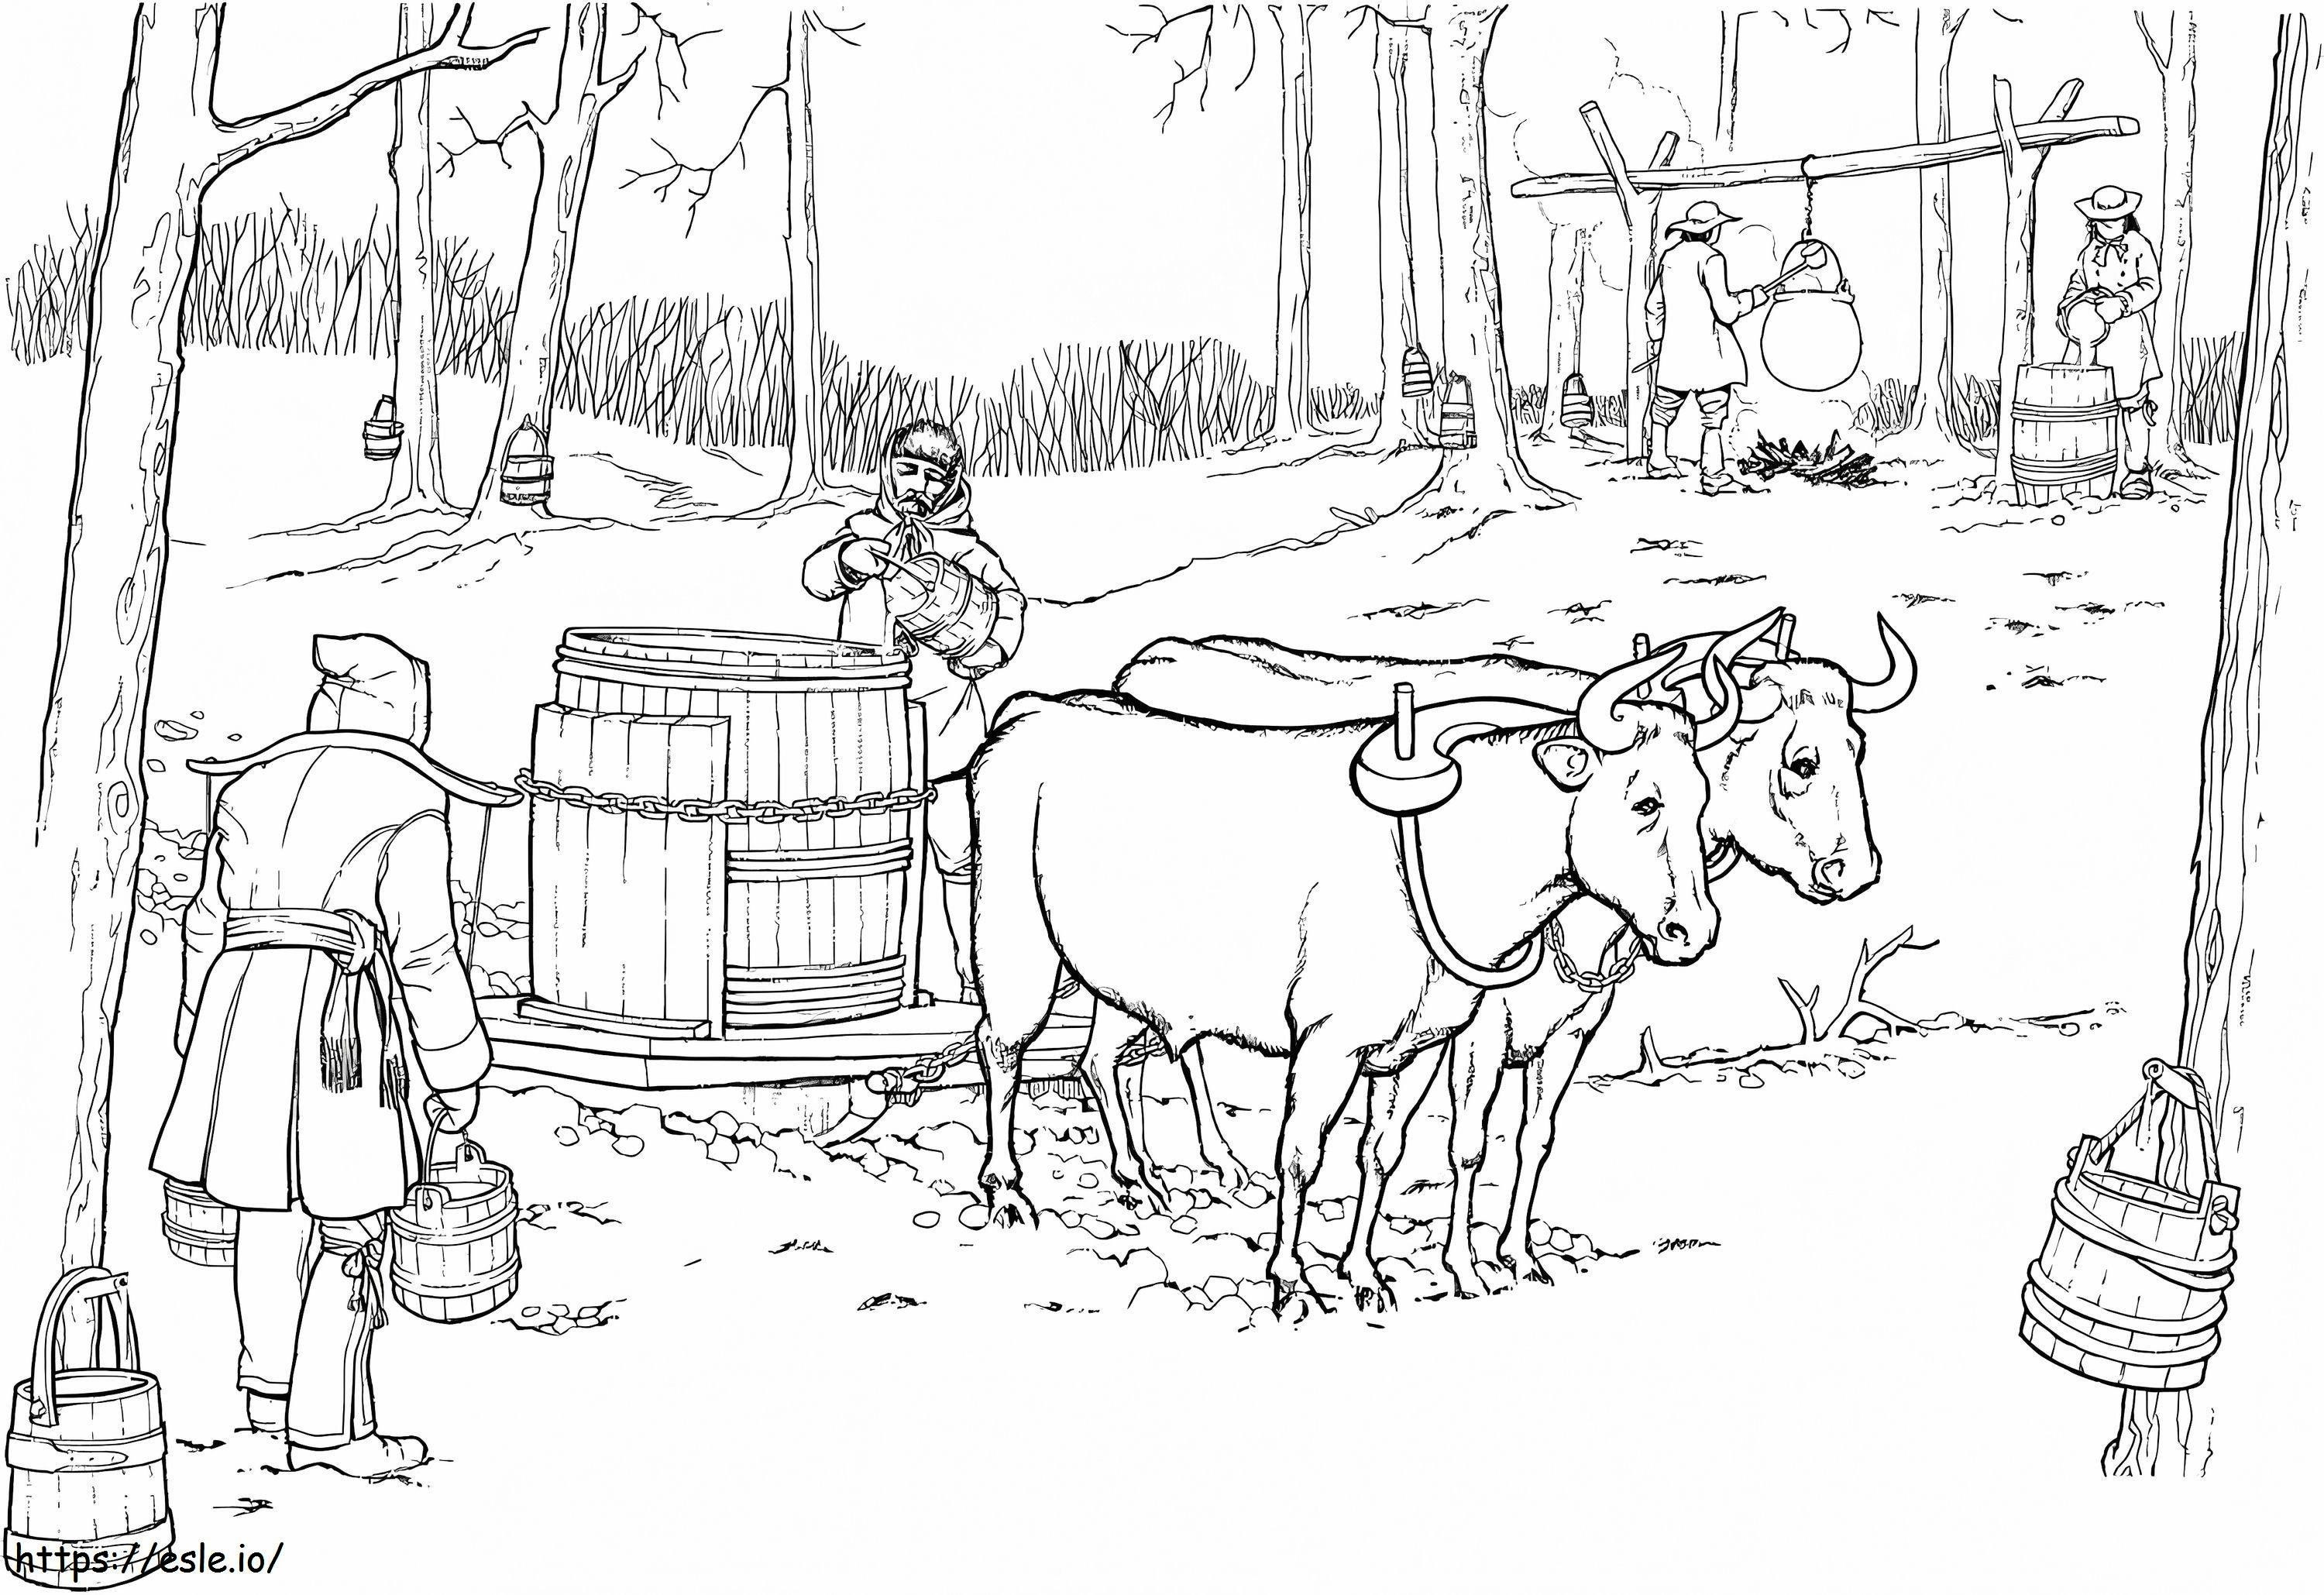 Oxen Pulling Sled coloring page